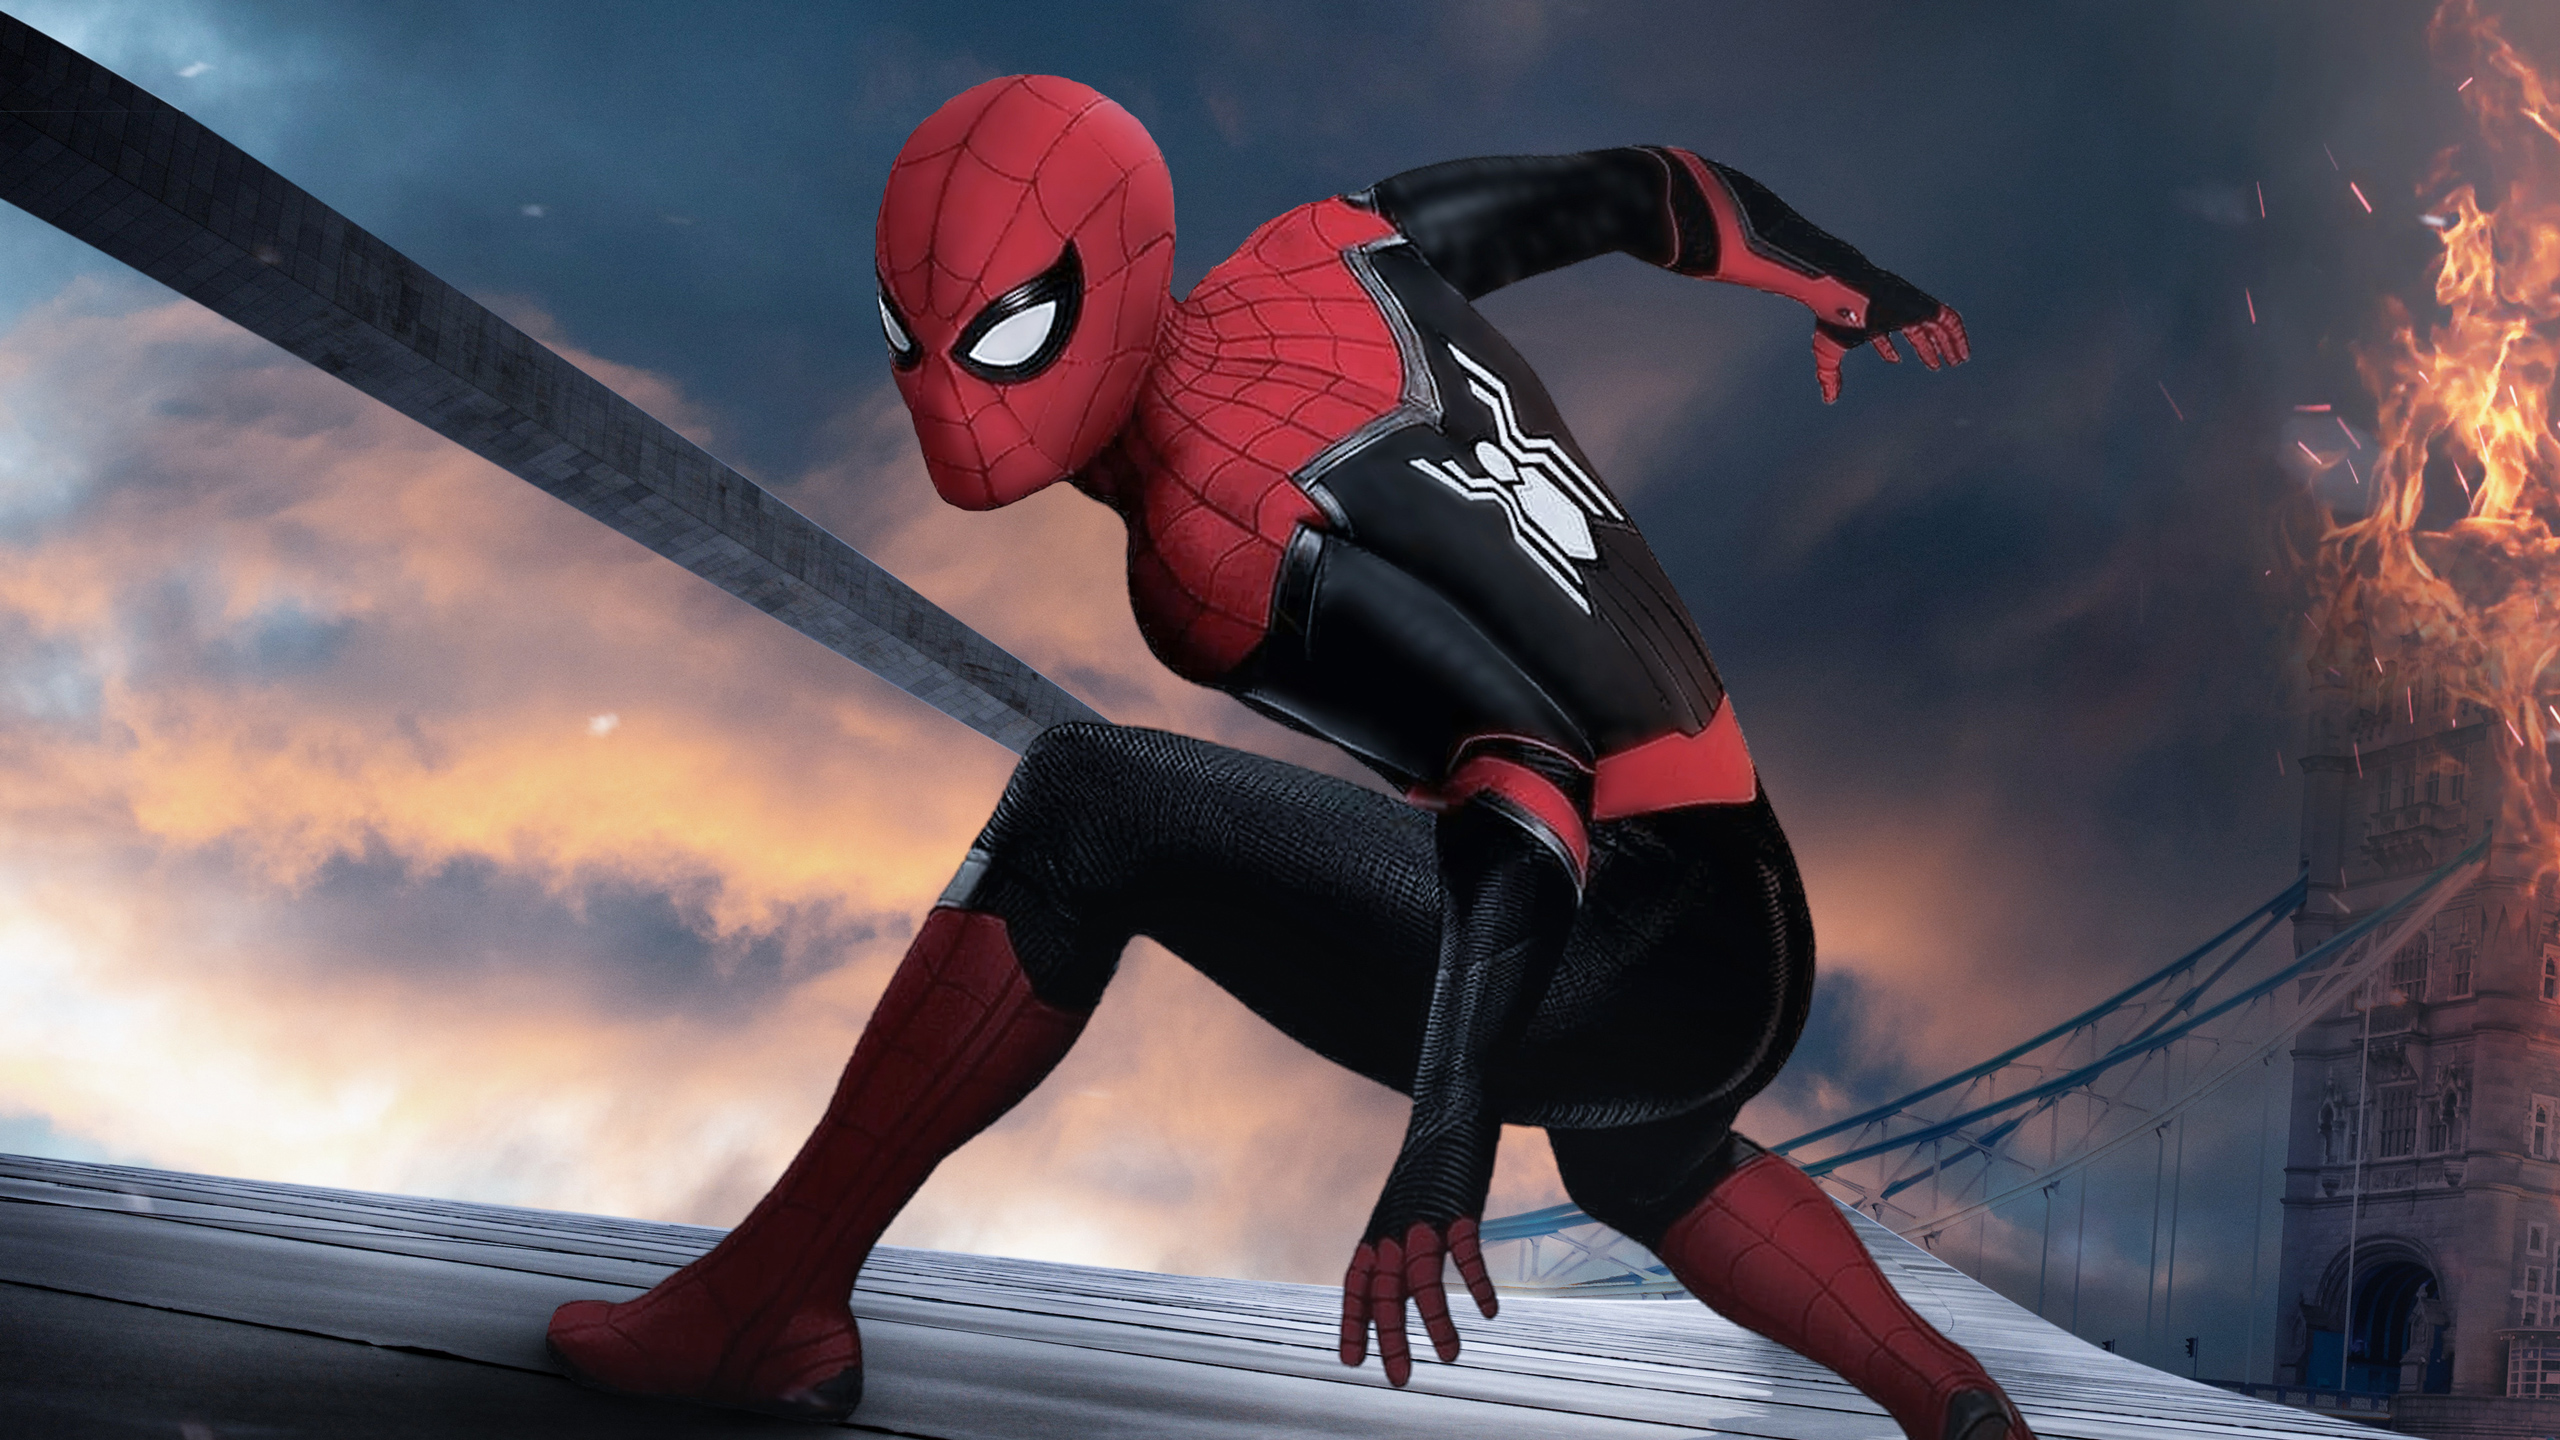 2560x1080 spider man far from home 4k 2560x1080 resolution.